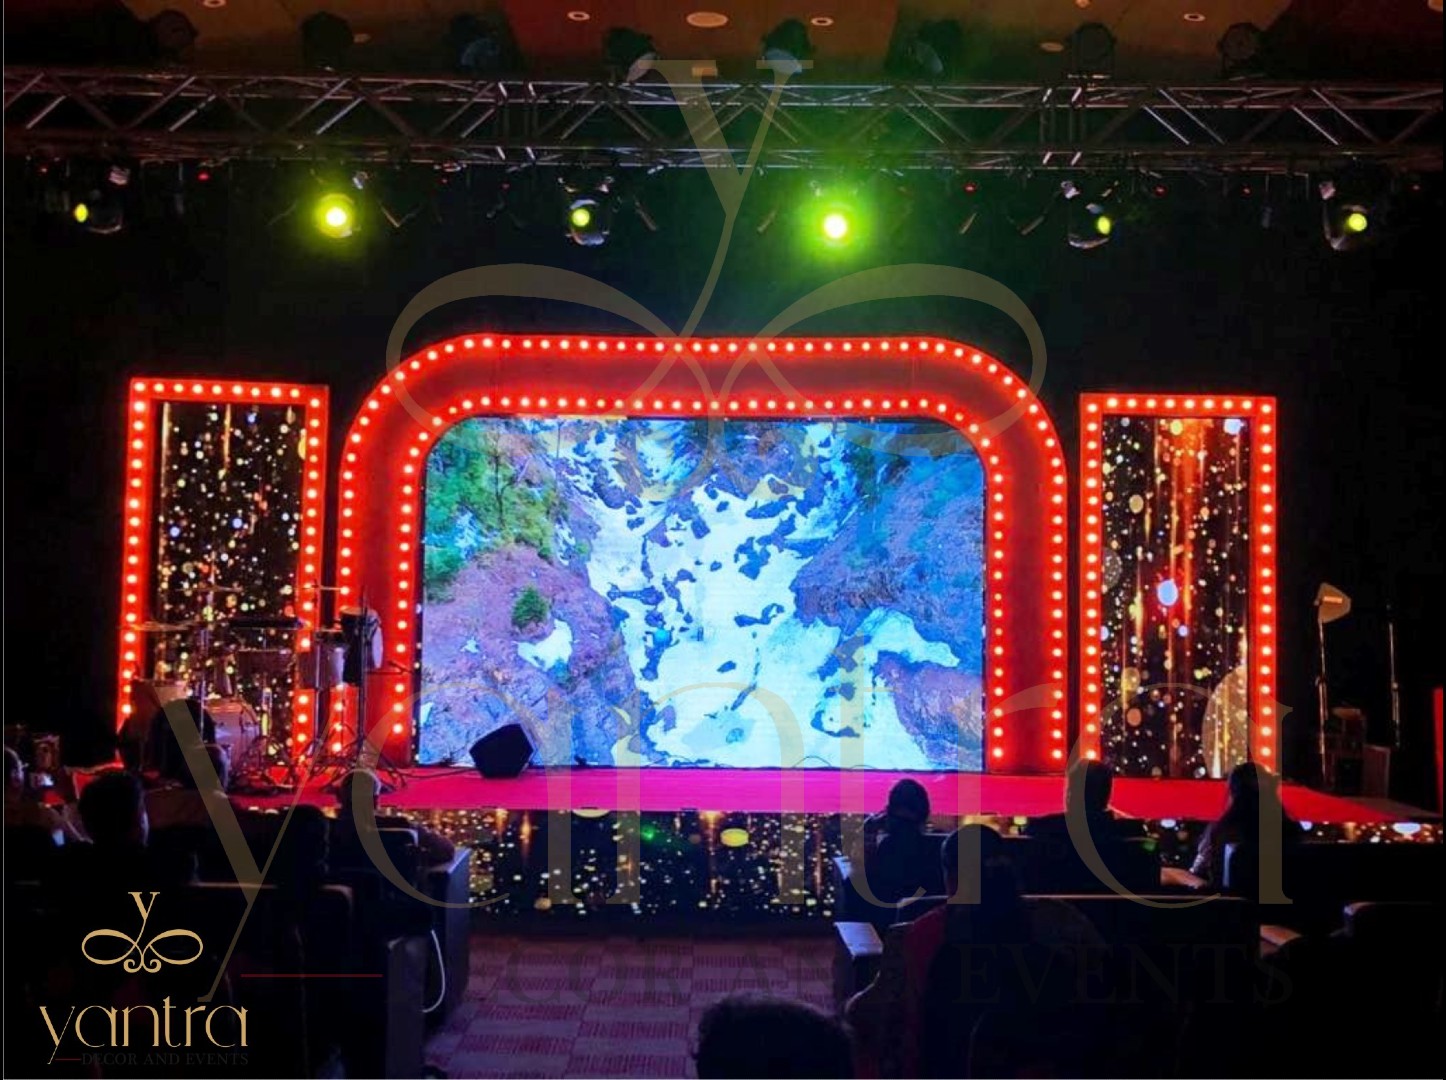 yantra-decor-events-theme-party-image-wedding-stage-bollywood